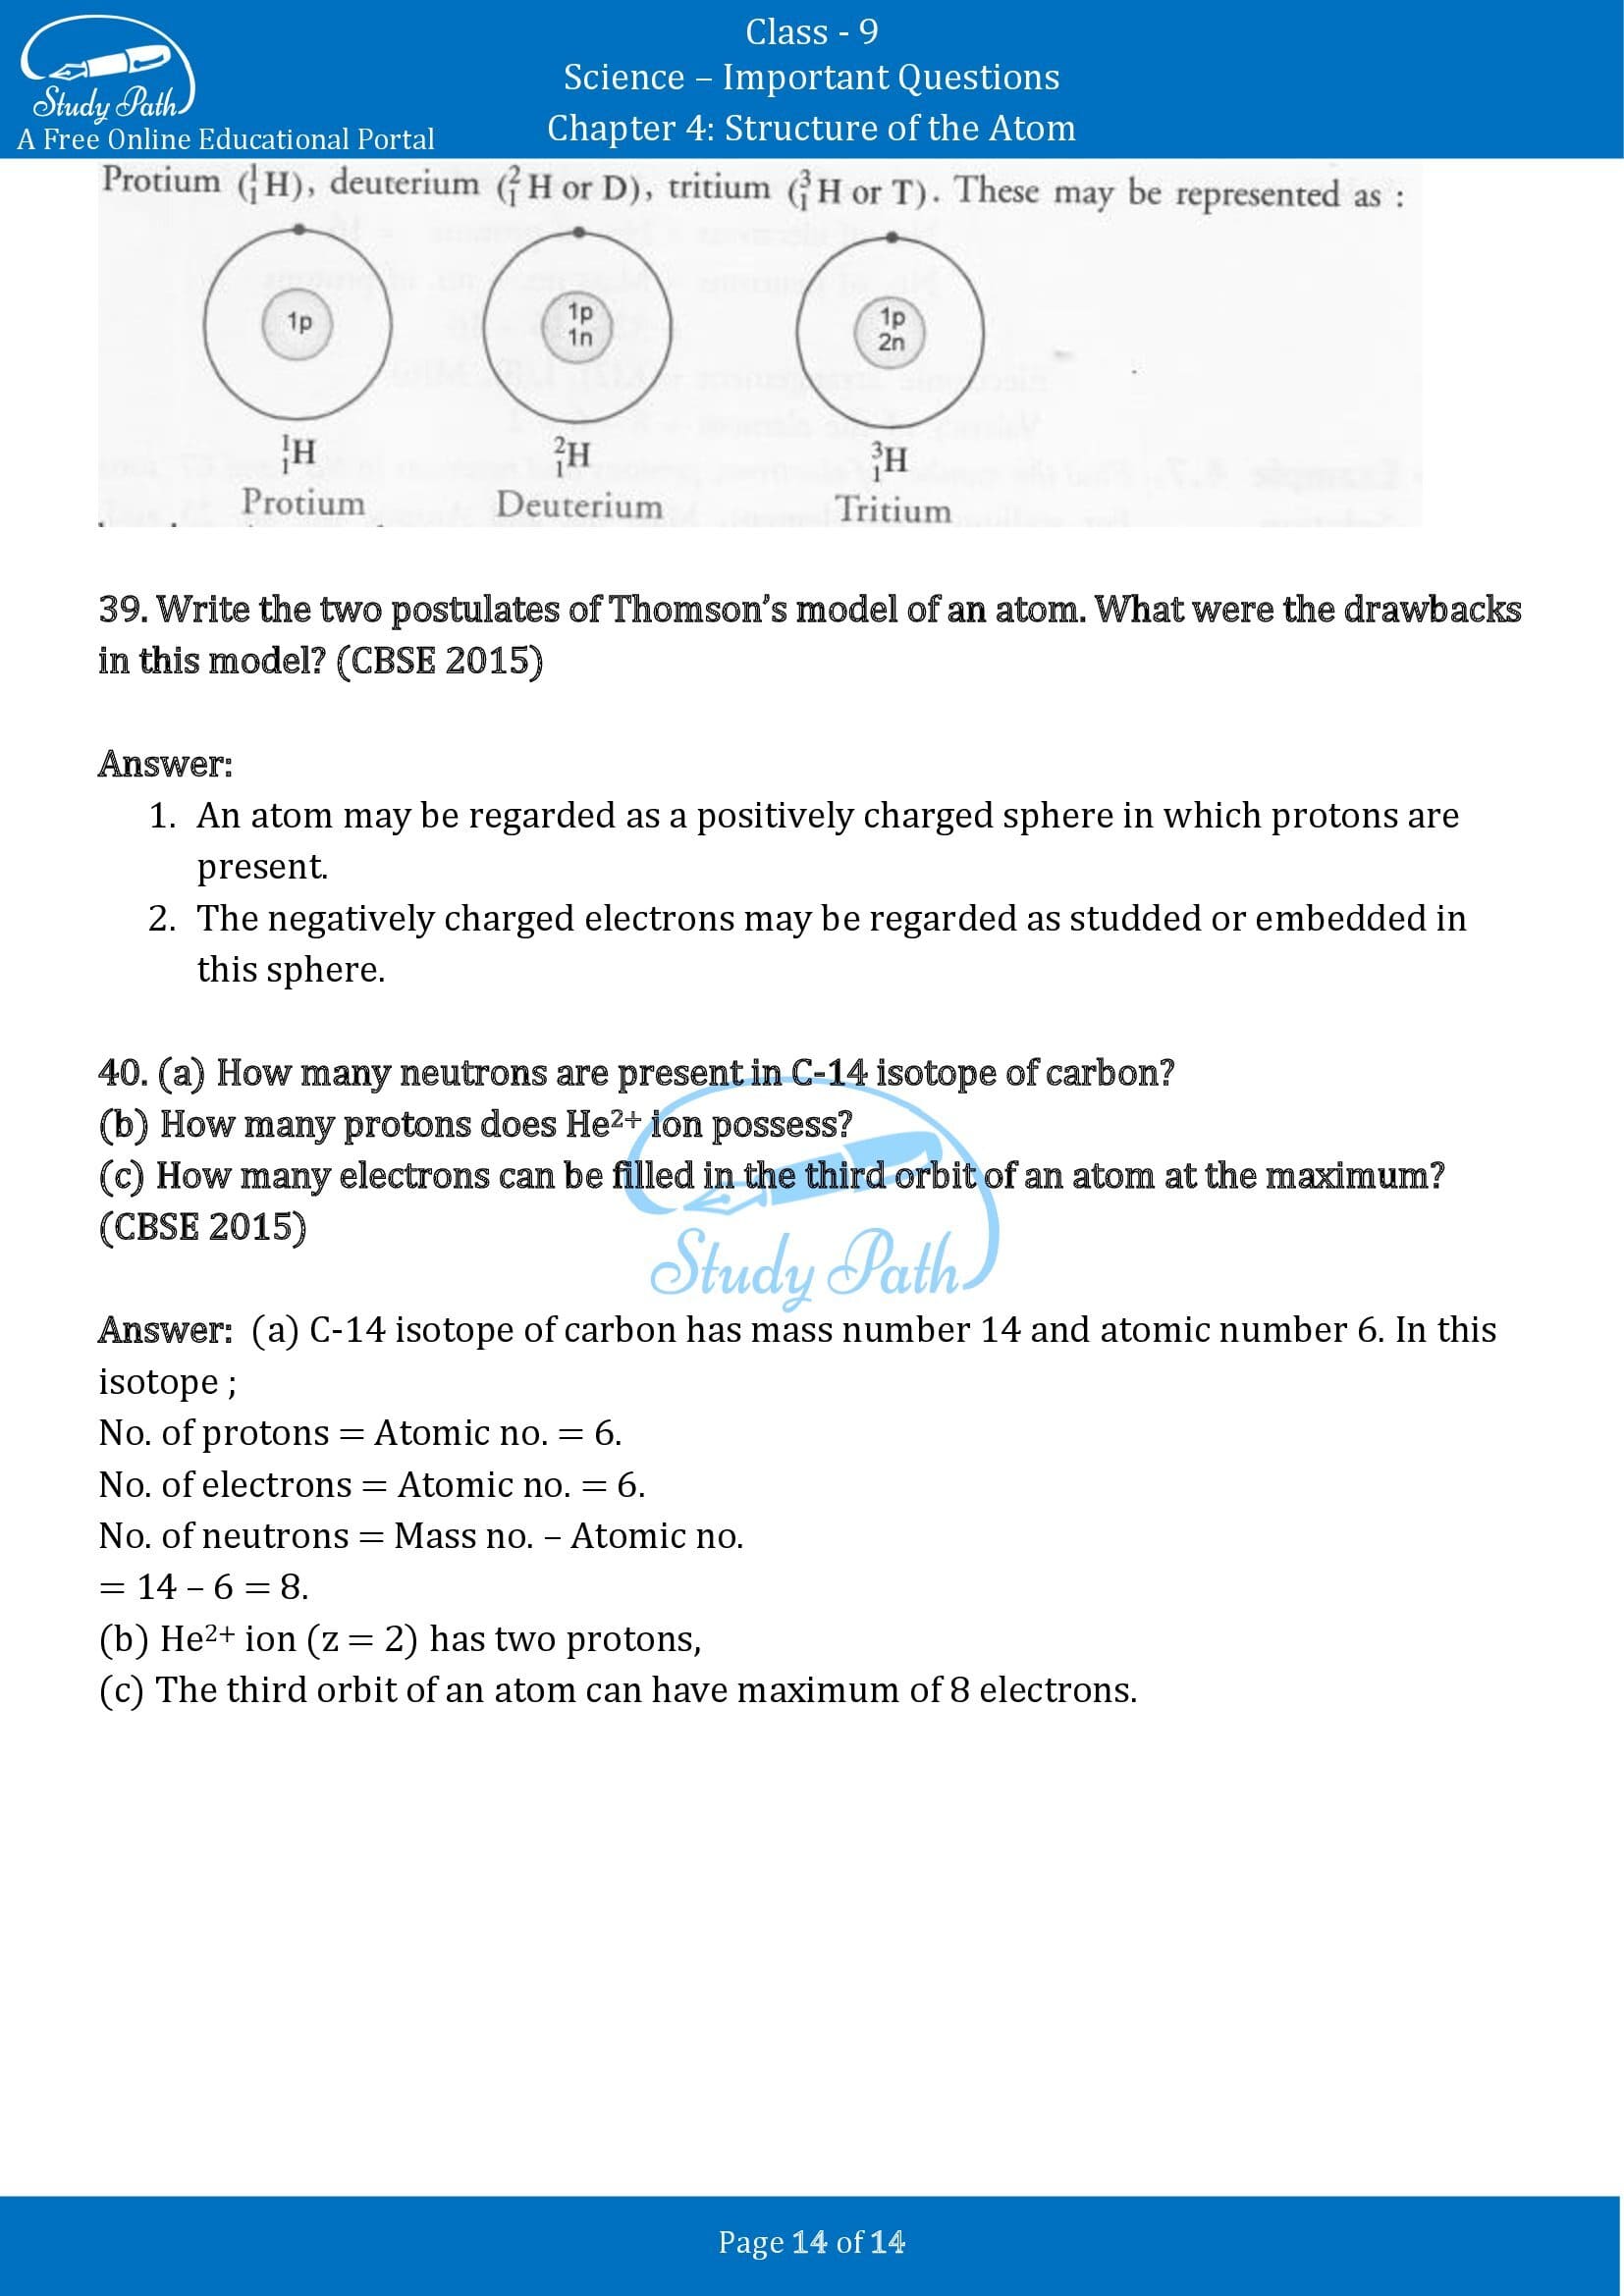 Important Questions for Class 9 Science Chapter 4 Structure of the Atom 00014